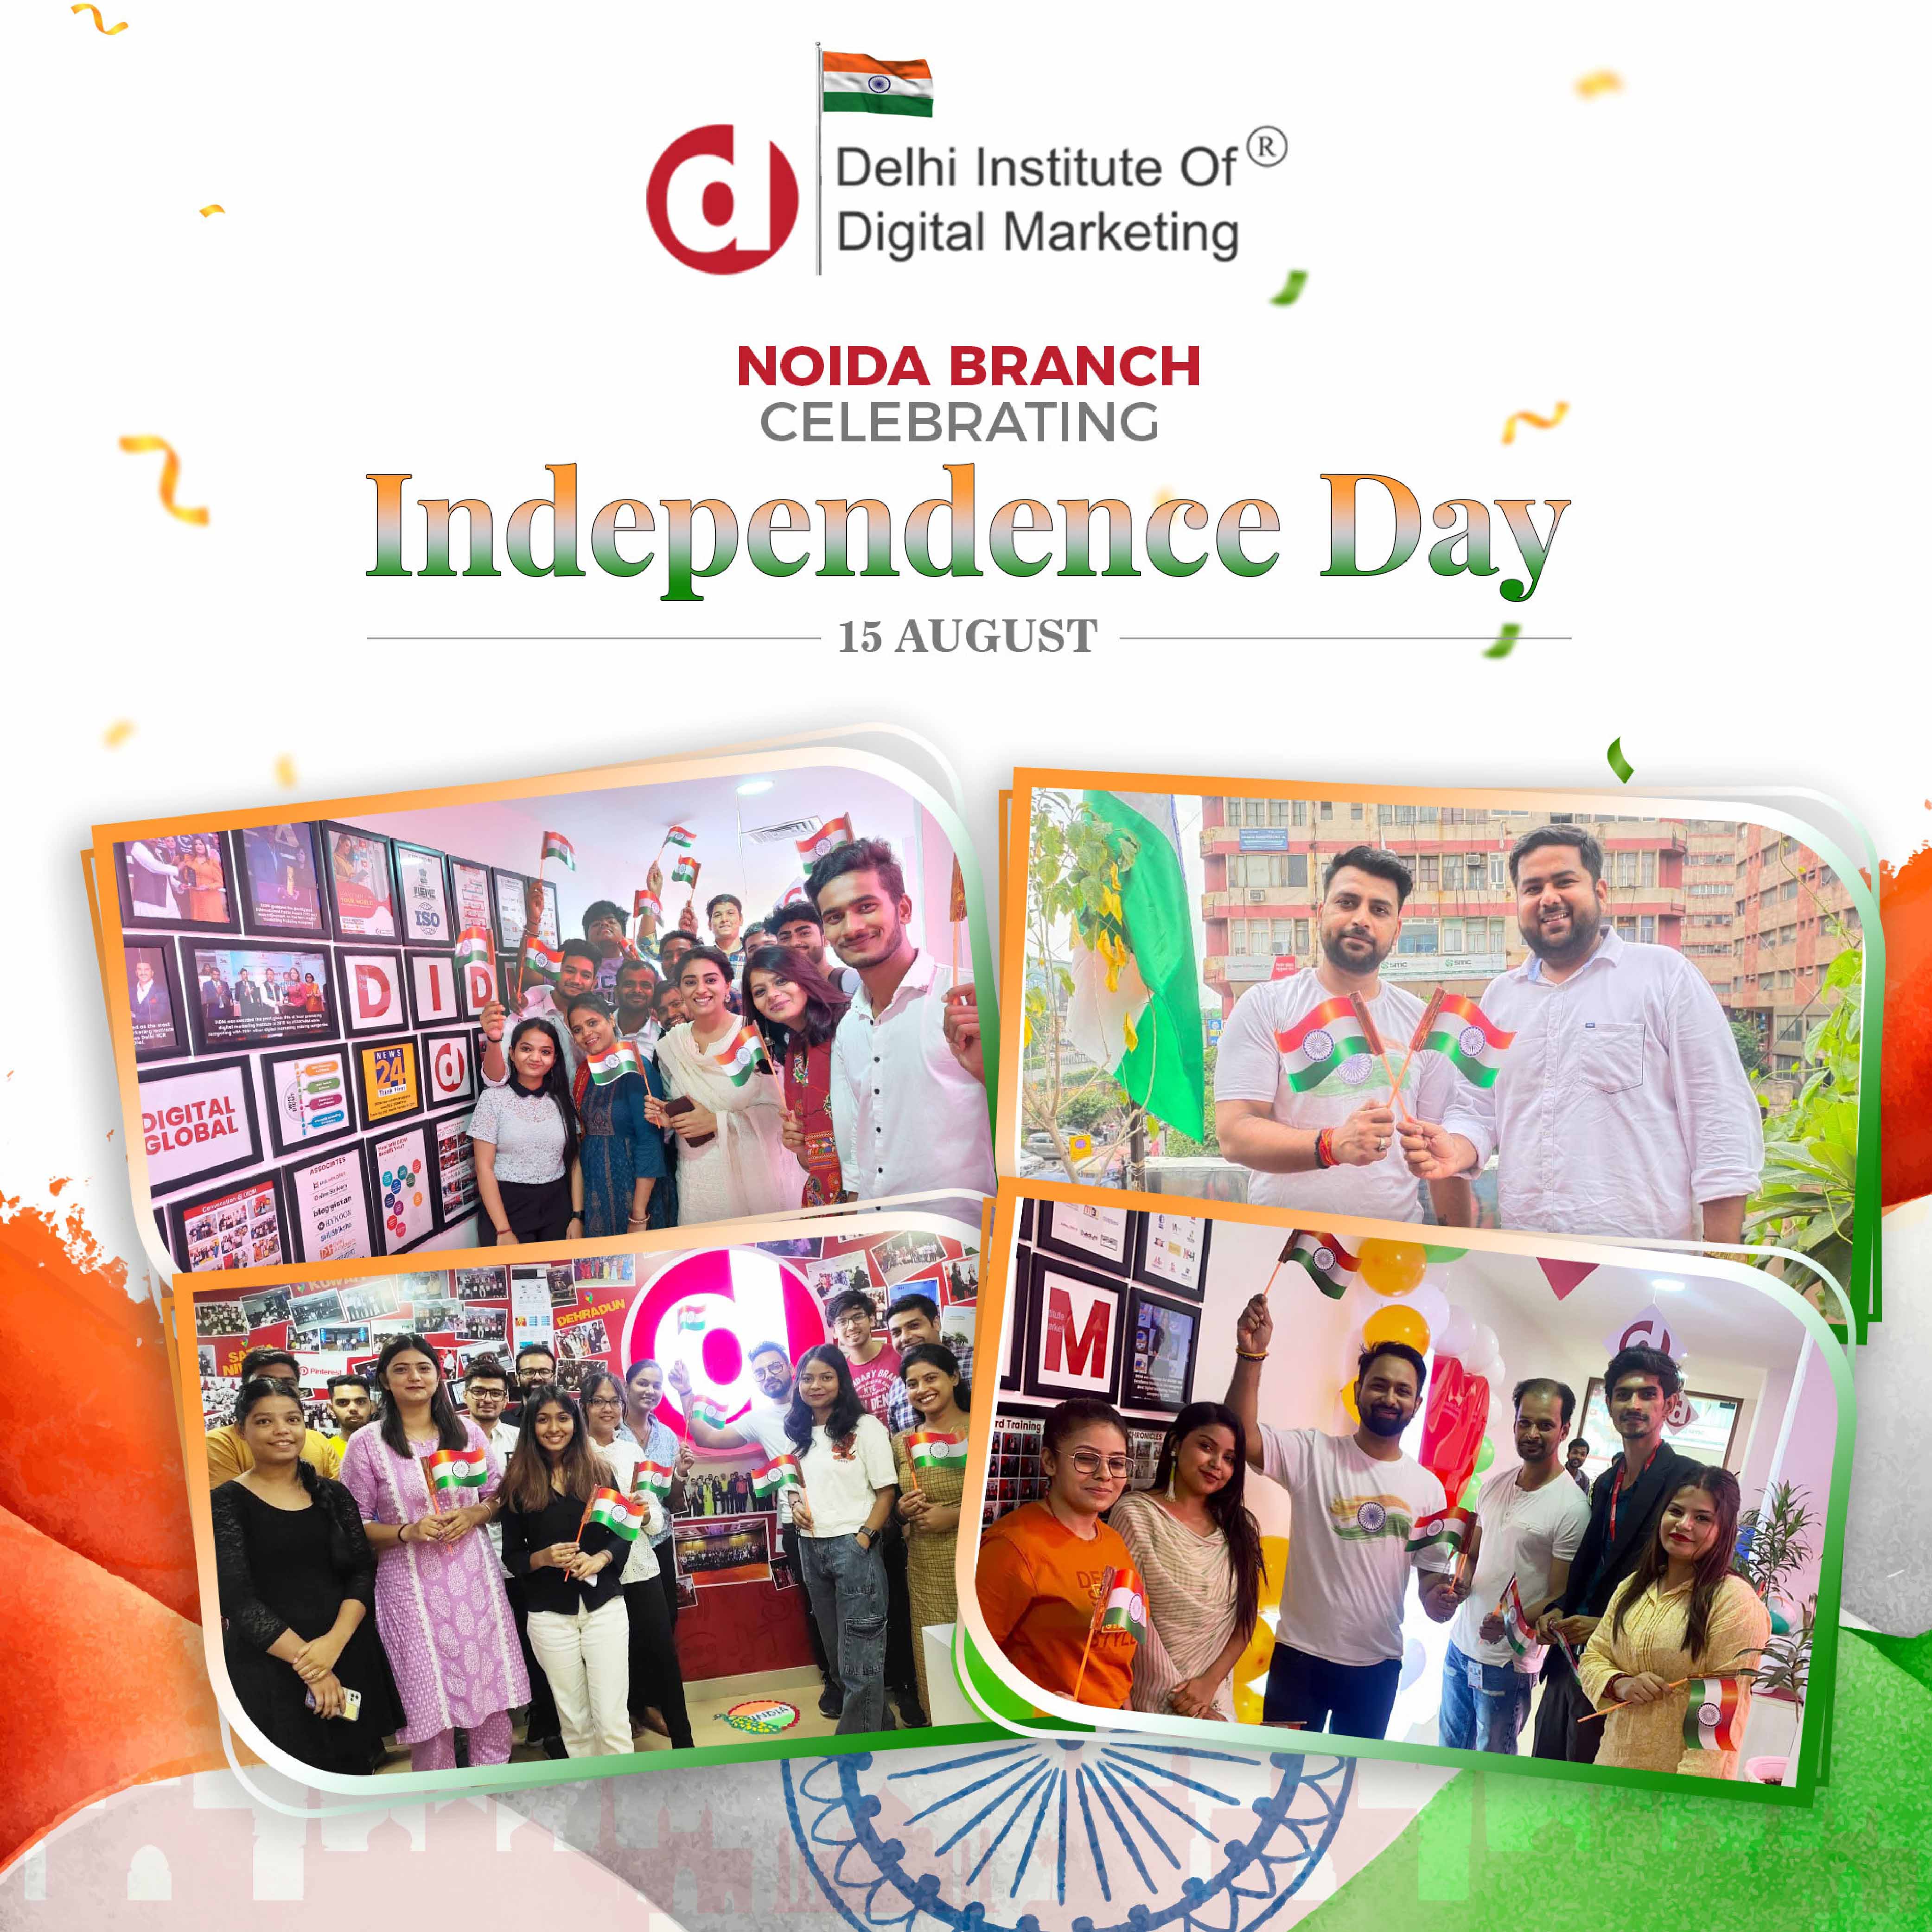 DIDM Noida Branch is celebrating its 77th Independence Day